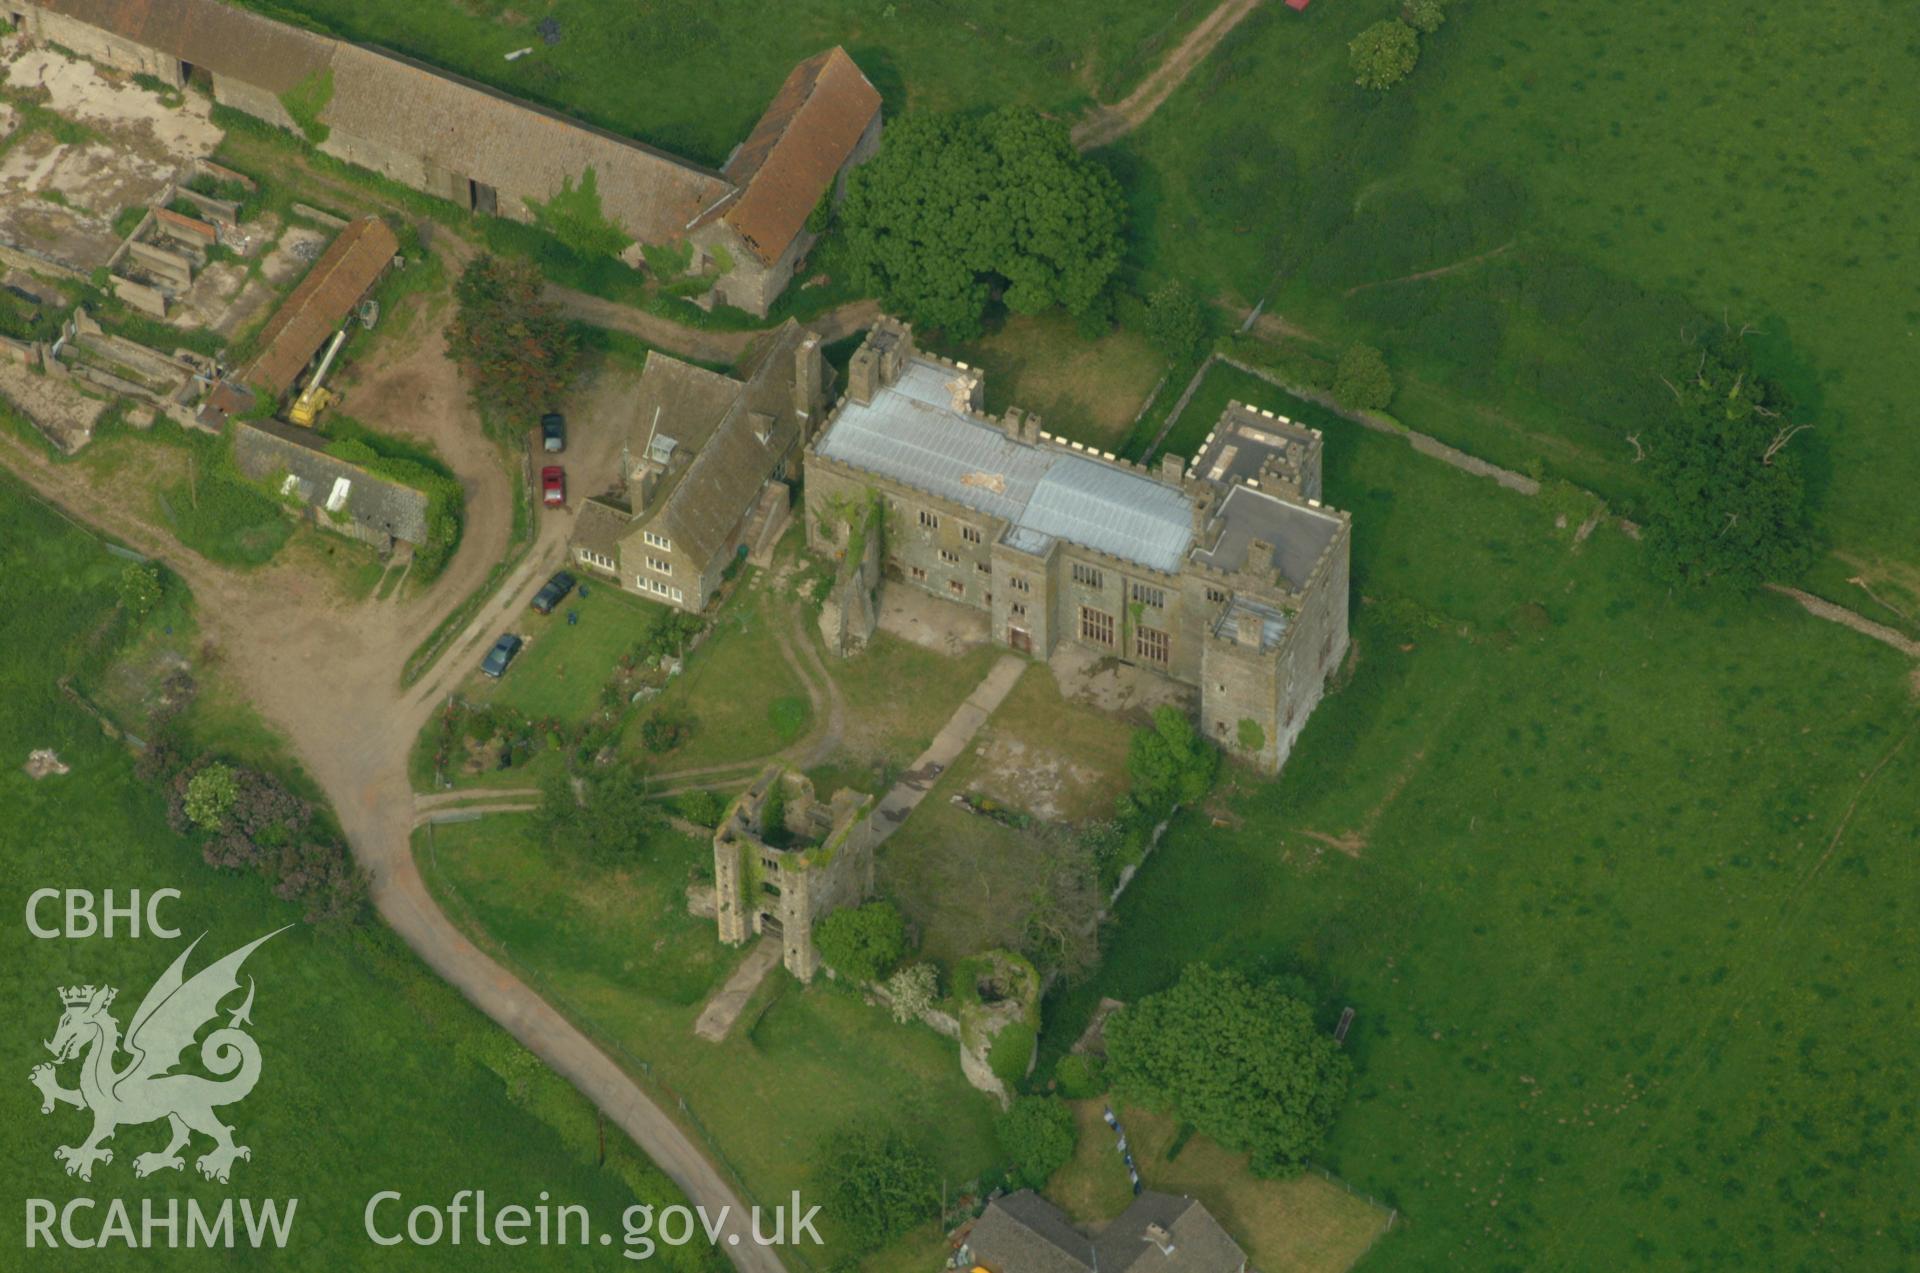 RCAHMW colour oblique aerial photograph of Pencoed Castle, Llanmartin taken on 26/05/2004 by Toby Driver